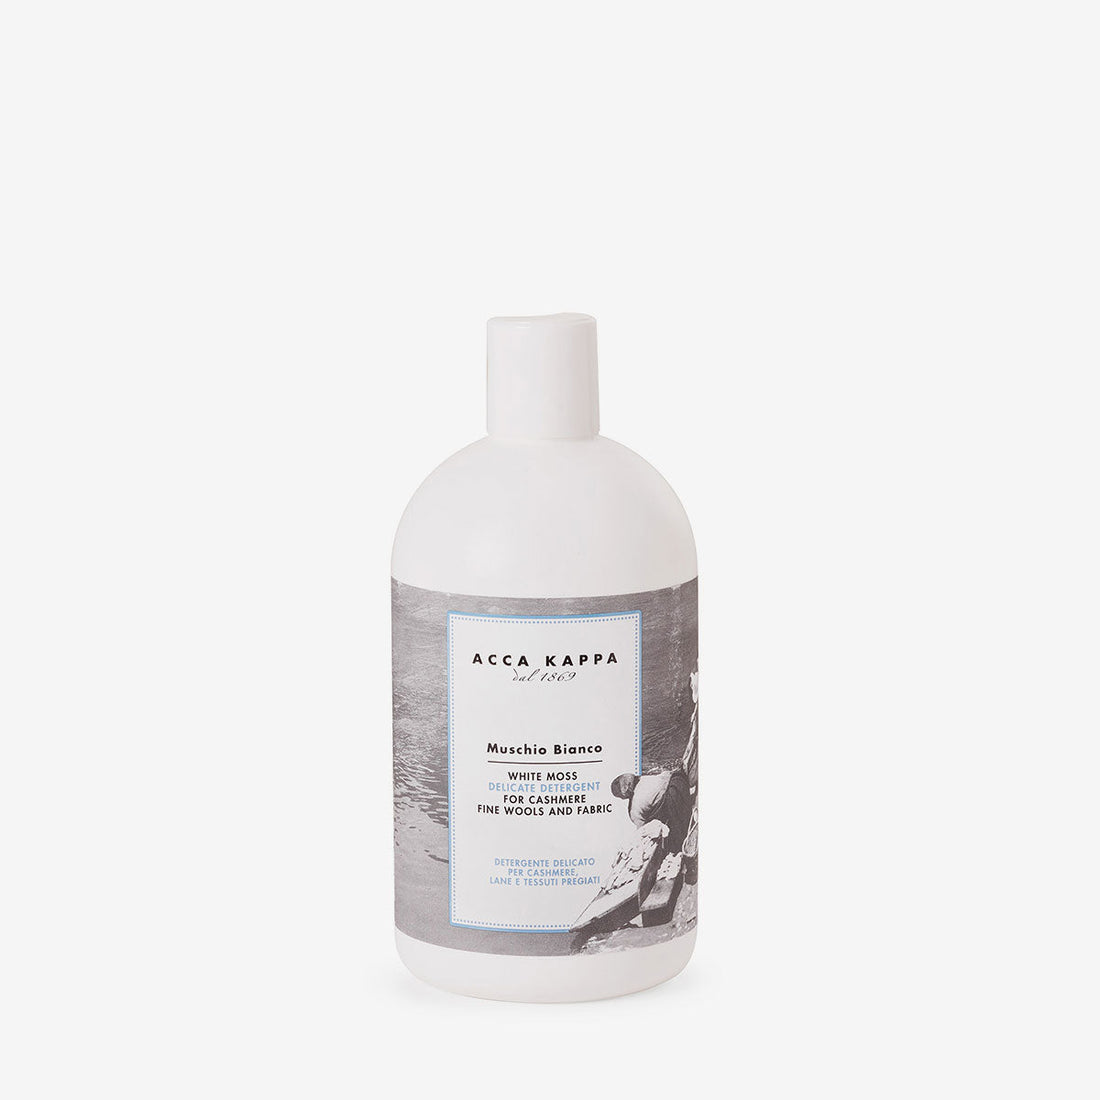 ACCA KAPPA White Moss Delicate Fabric Detergent